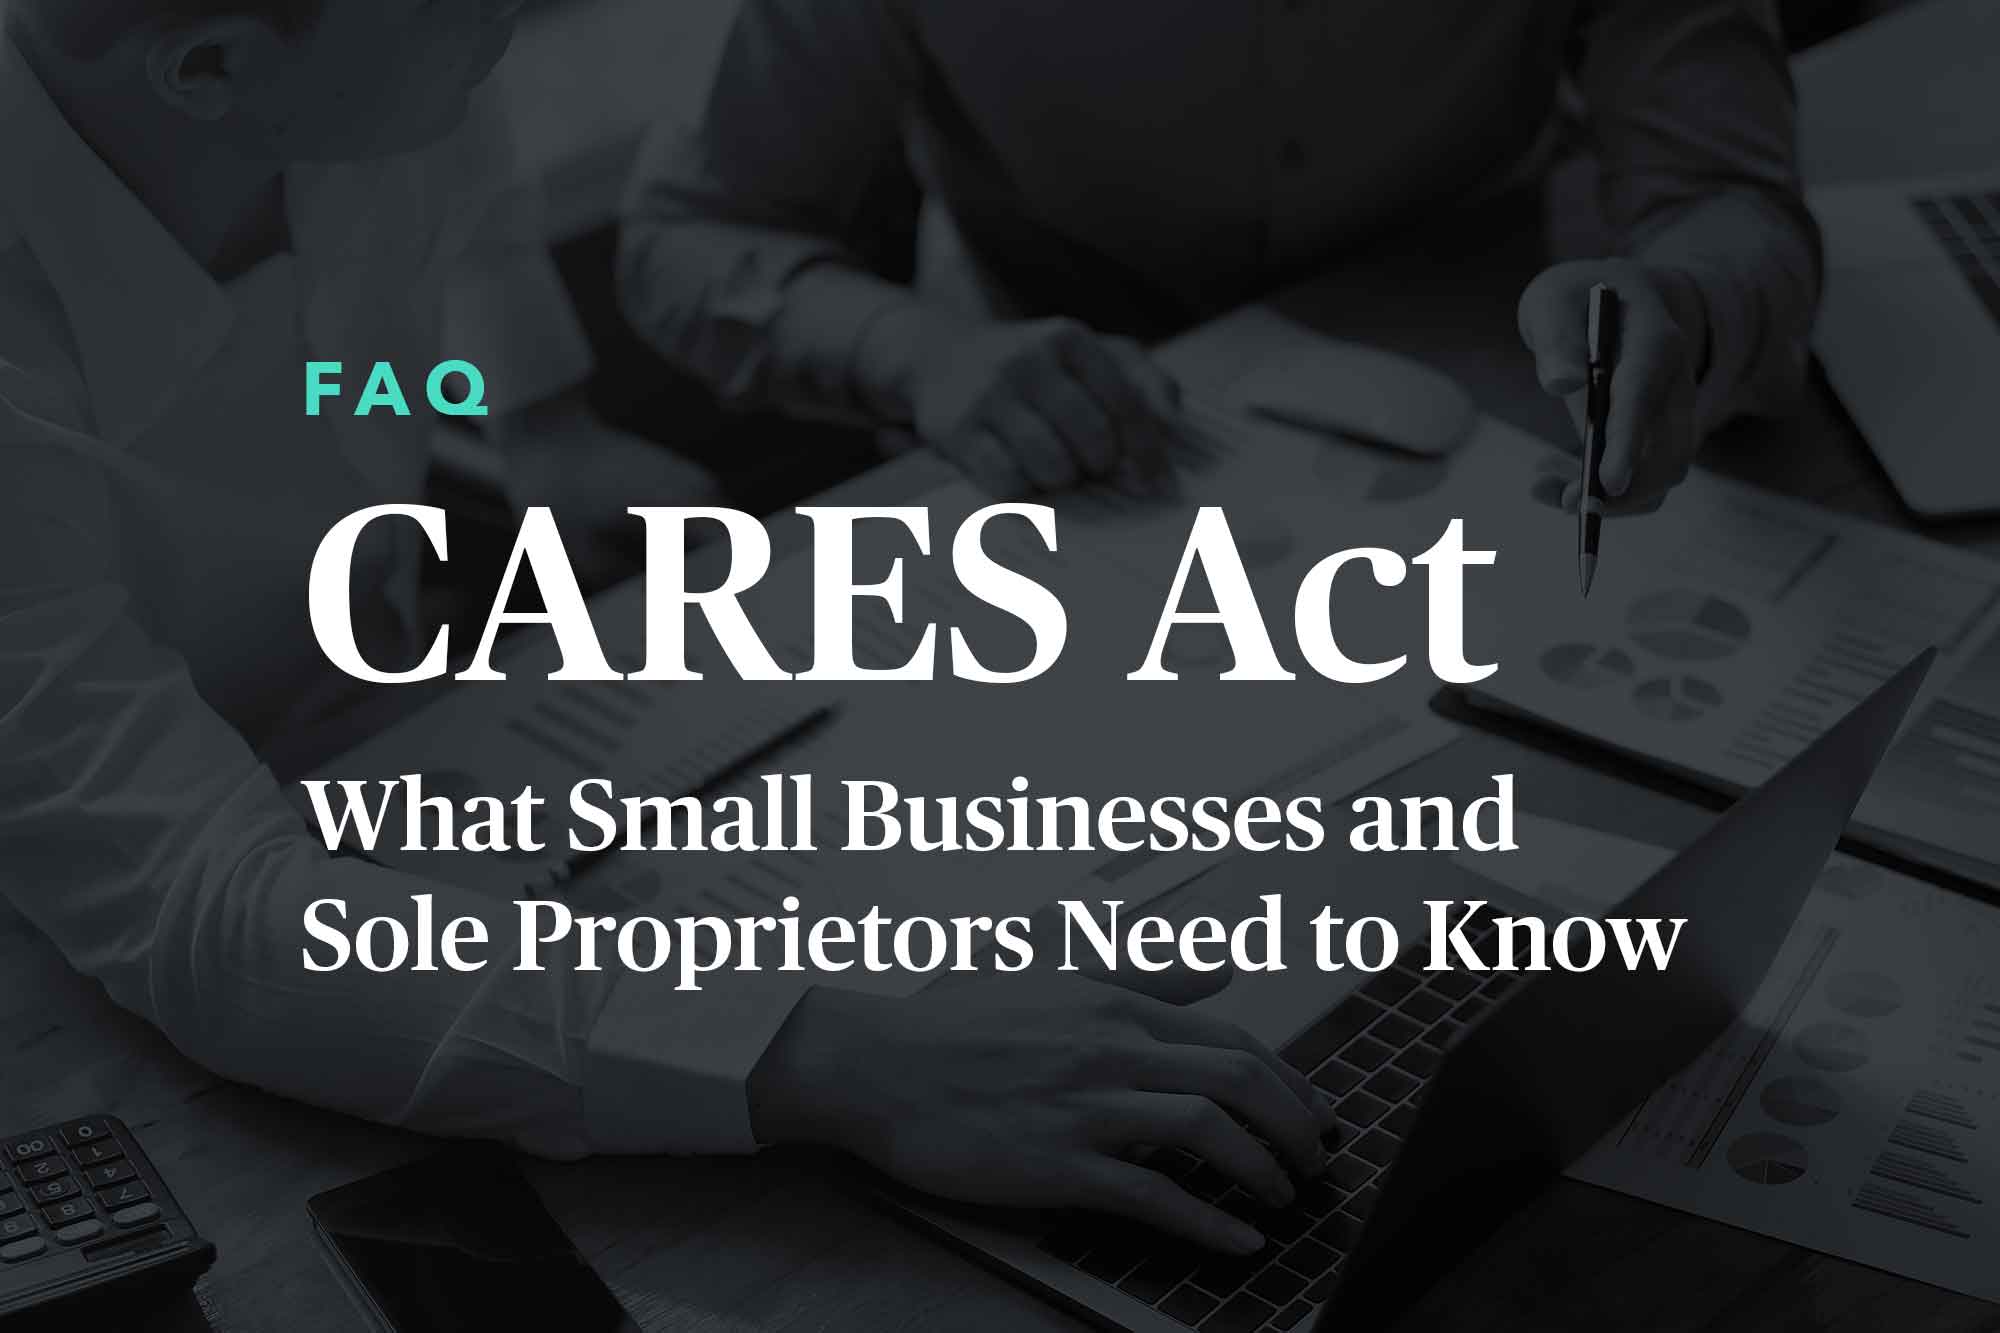 CARES Act FAQ - What Small Businesses and Sole Proprietors Need to Know